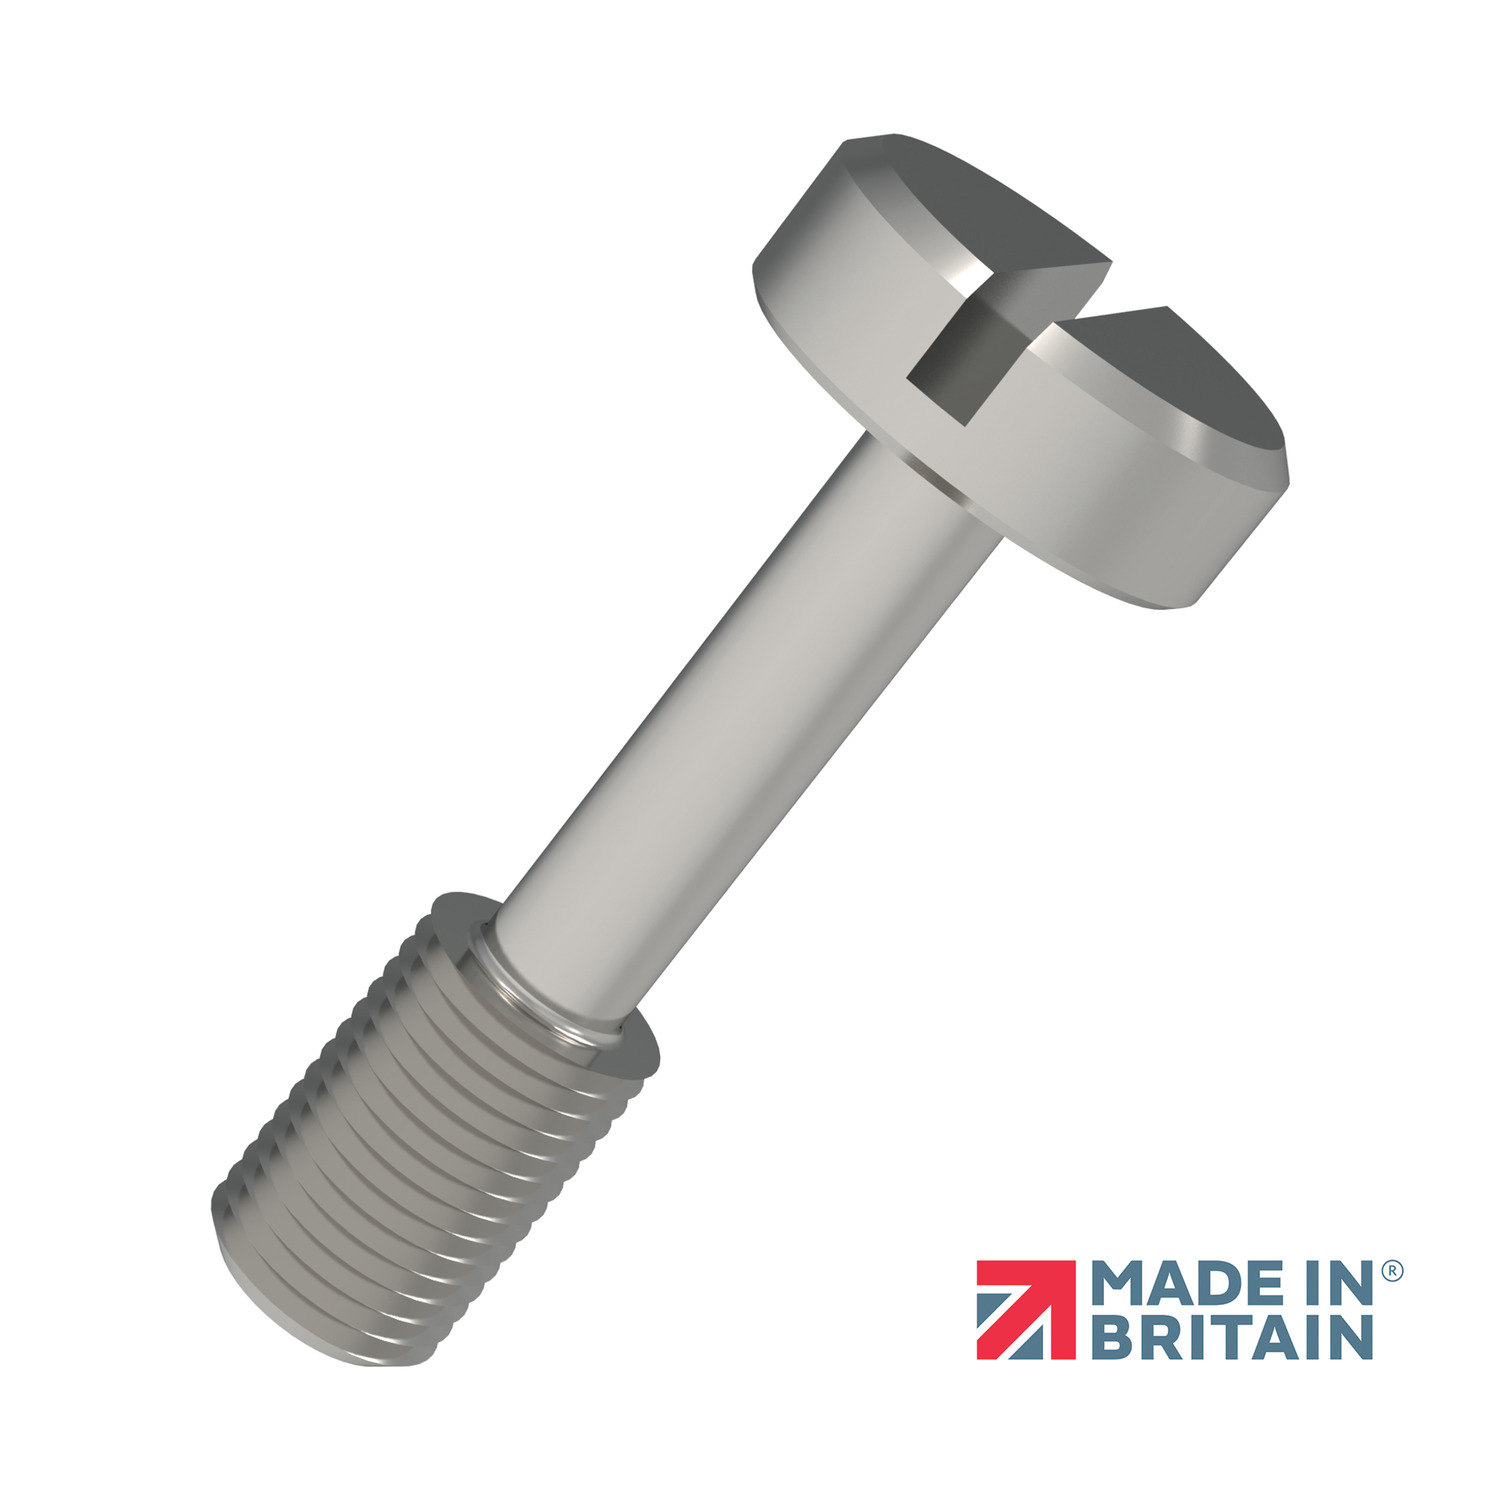 Captive Screws - Cheese Head Cheese head/slotted pan head captive screws available in stainless steel (AISI 303 and 316), titanium, and other materials/head types on request. Inch measurements also available (P0155.i). In stock or with very short lead times.